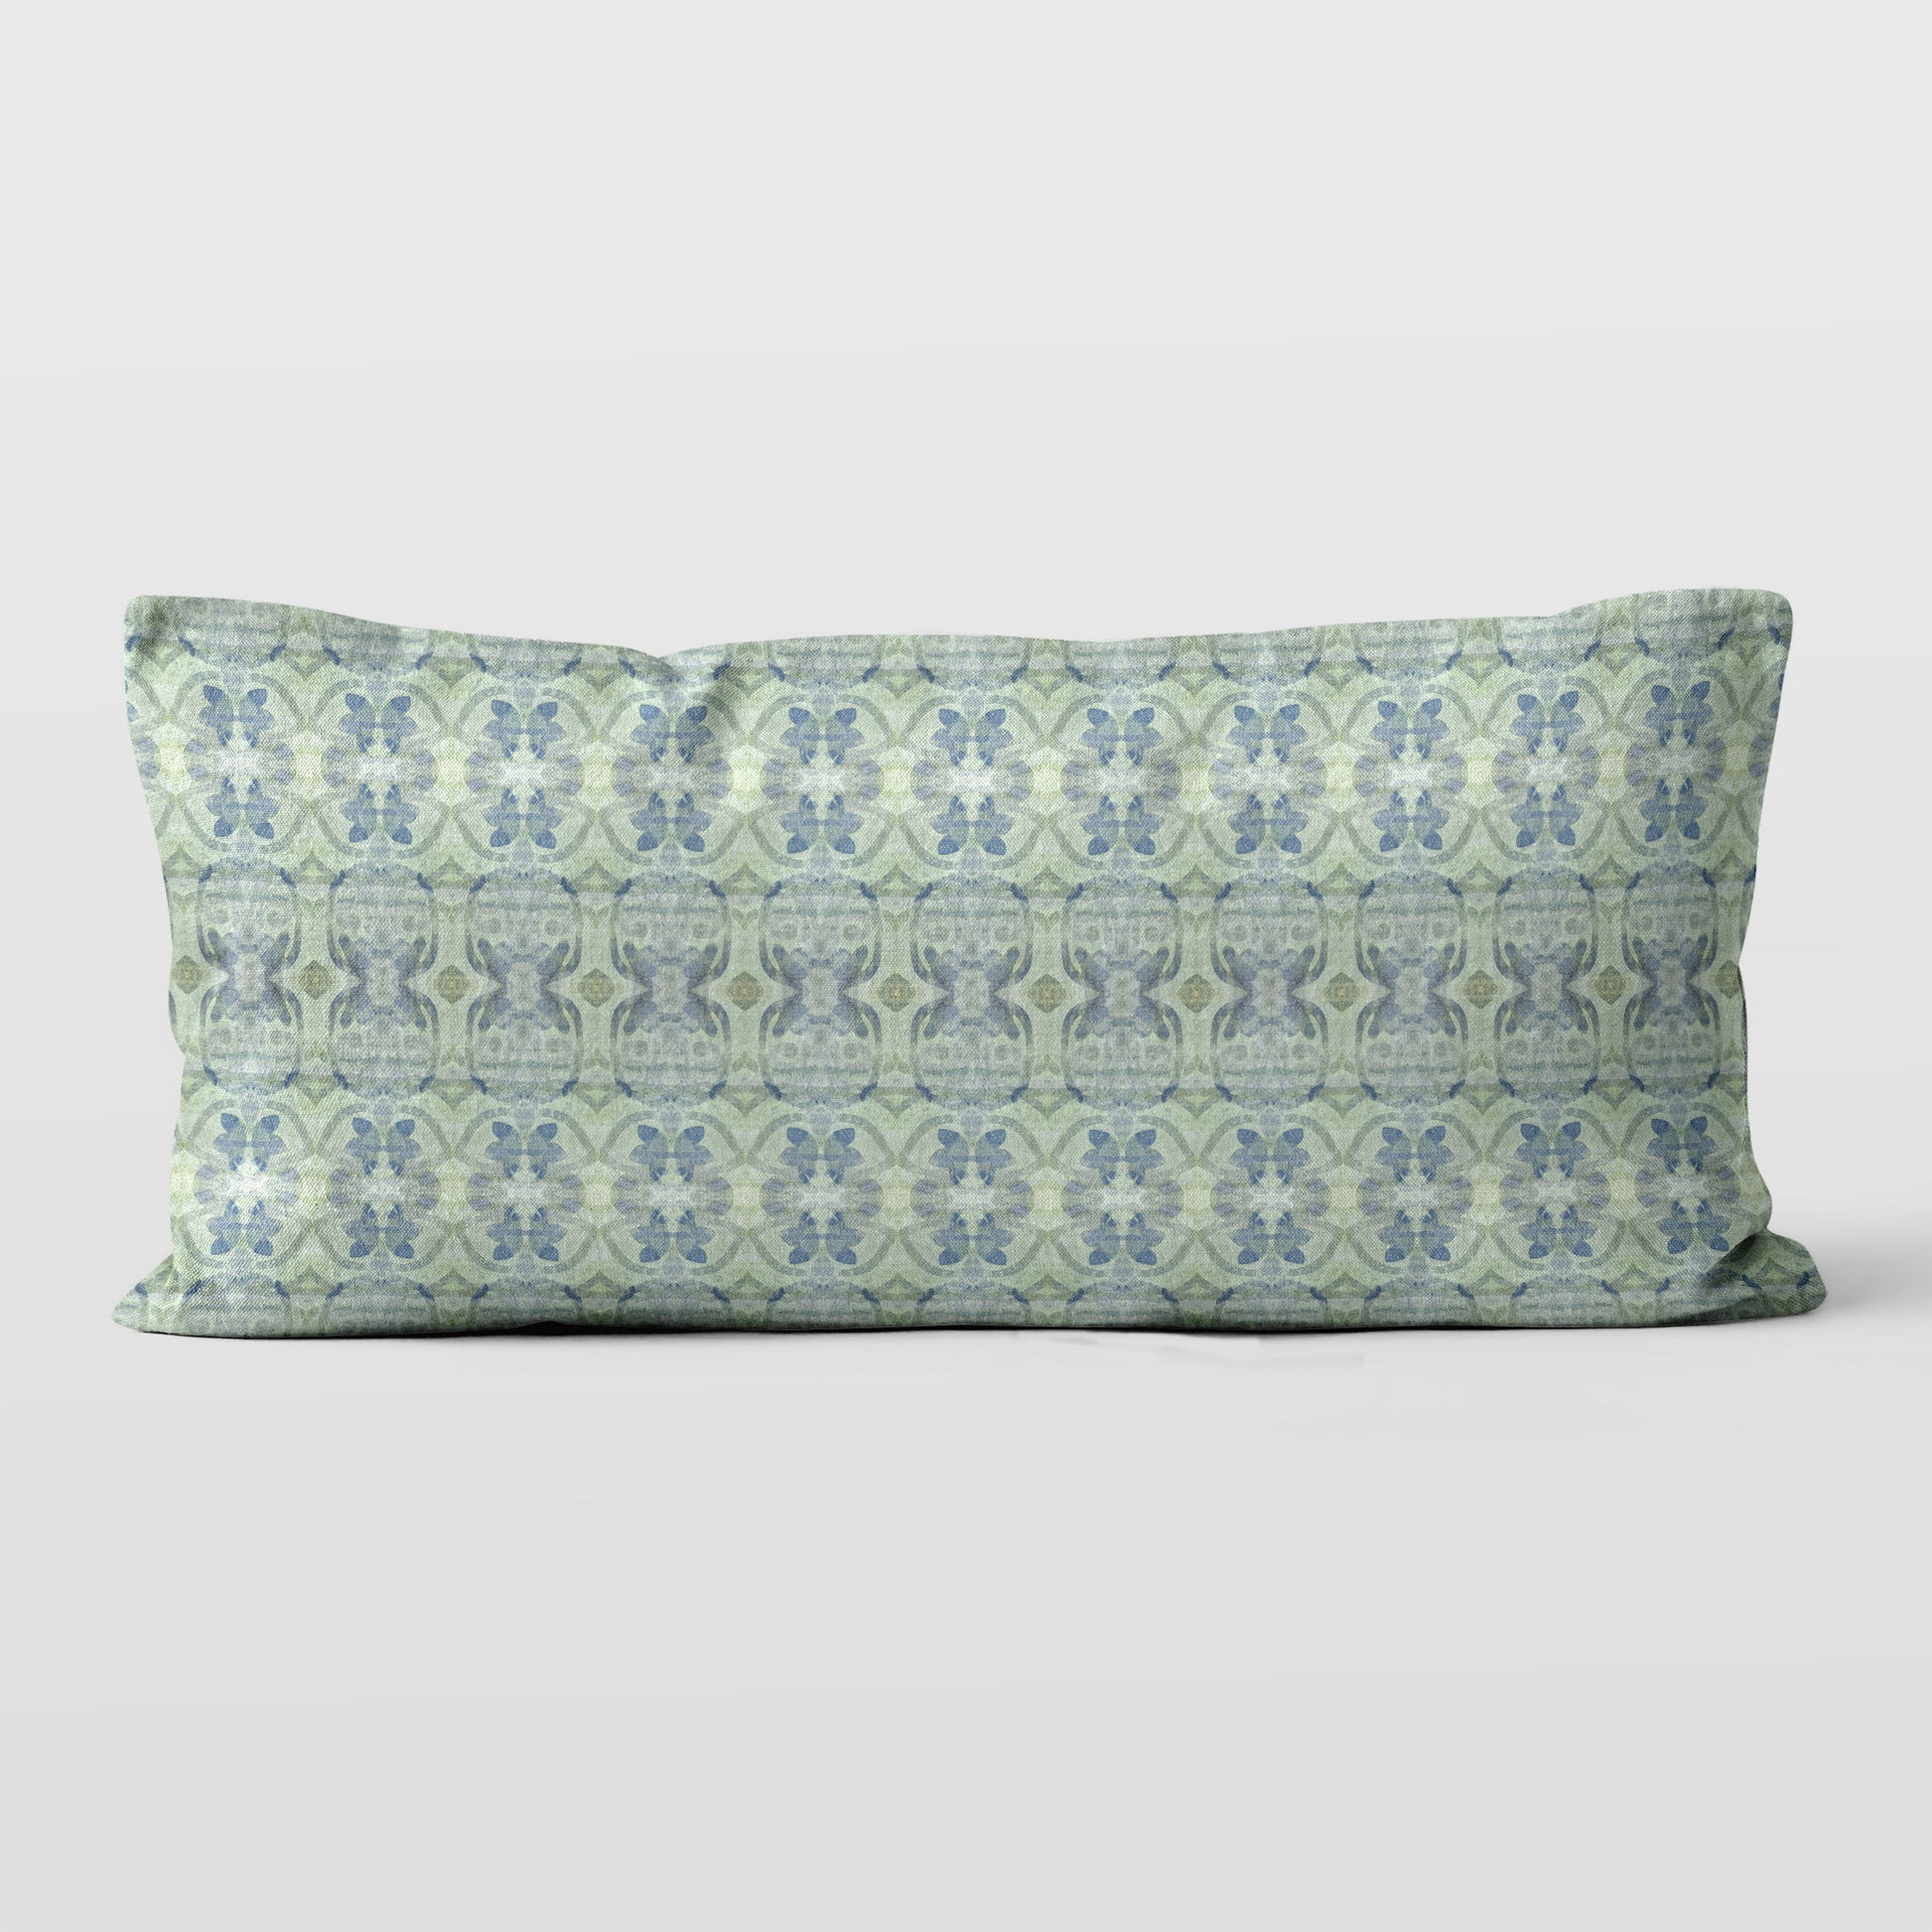 Lumbar pillow featuring an abstract blue and green floral pattern